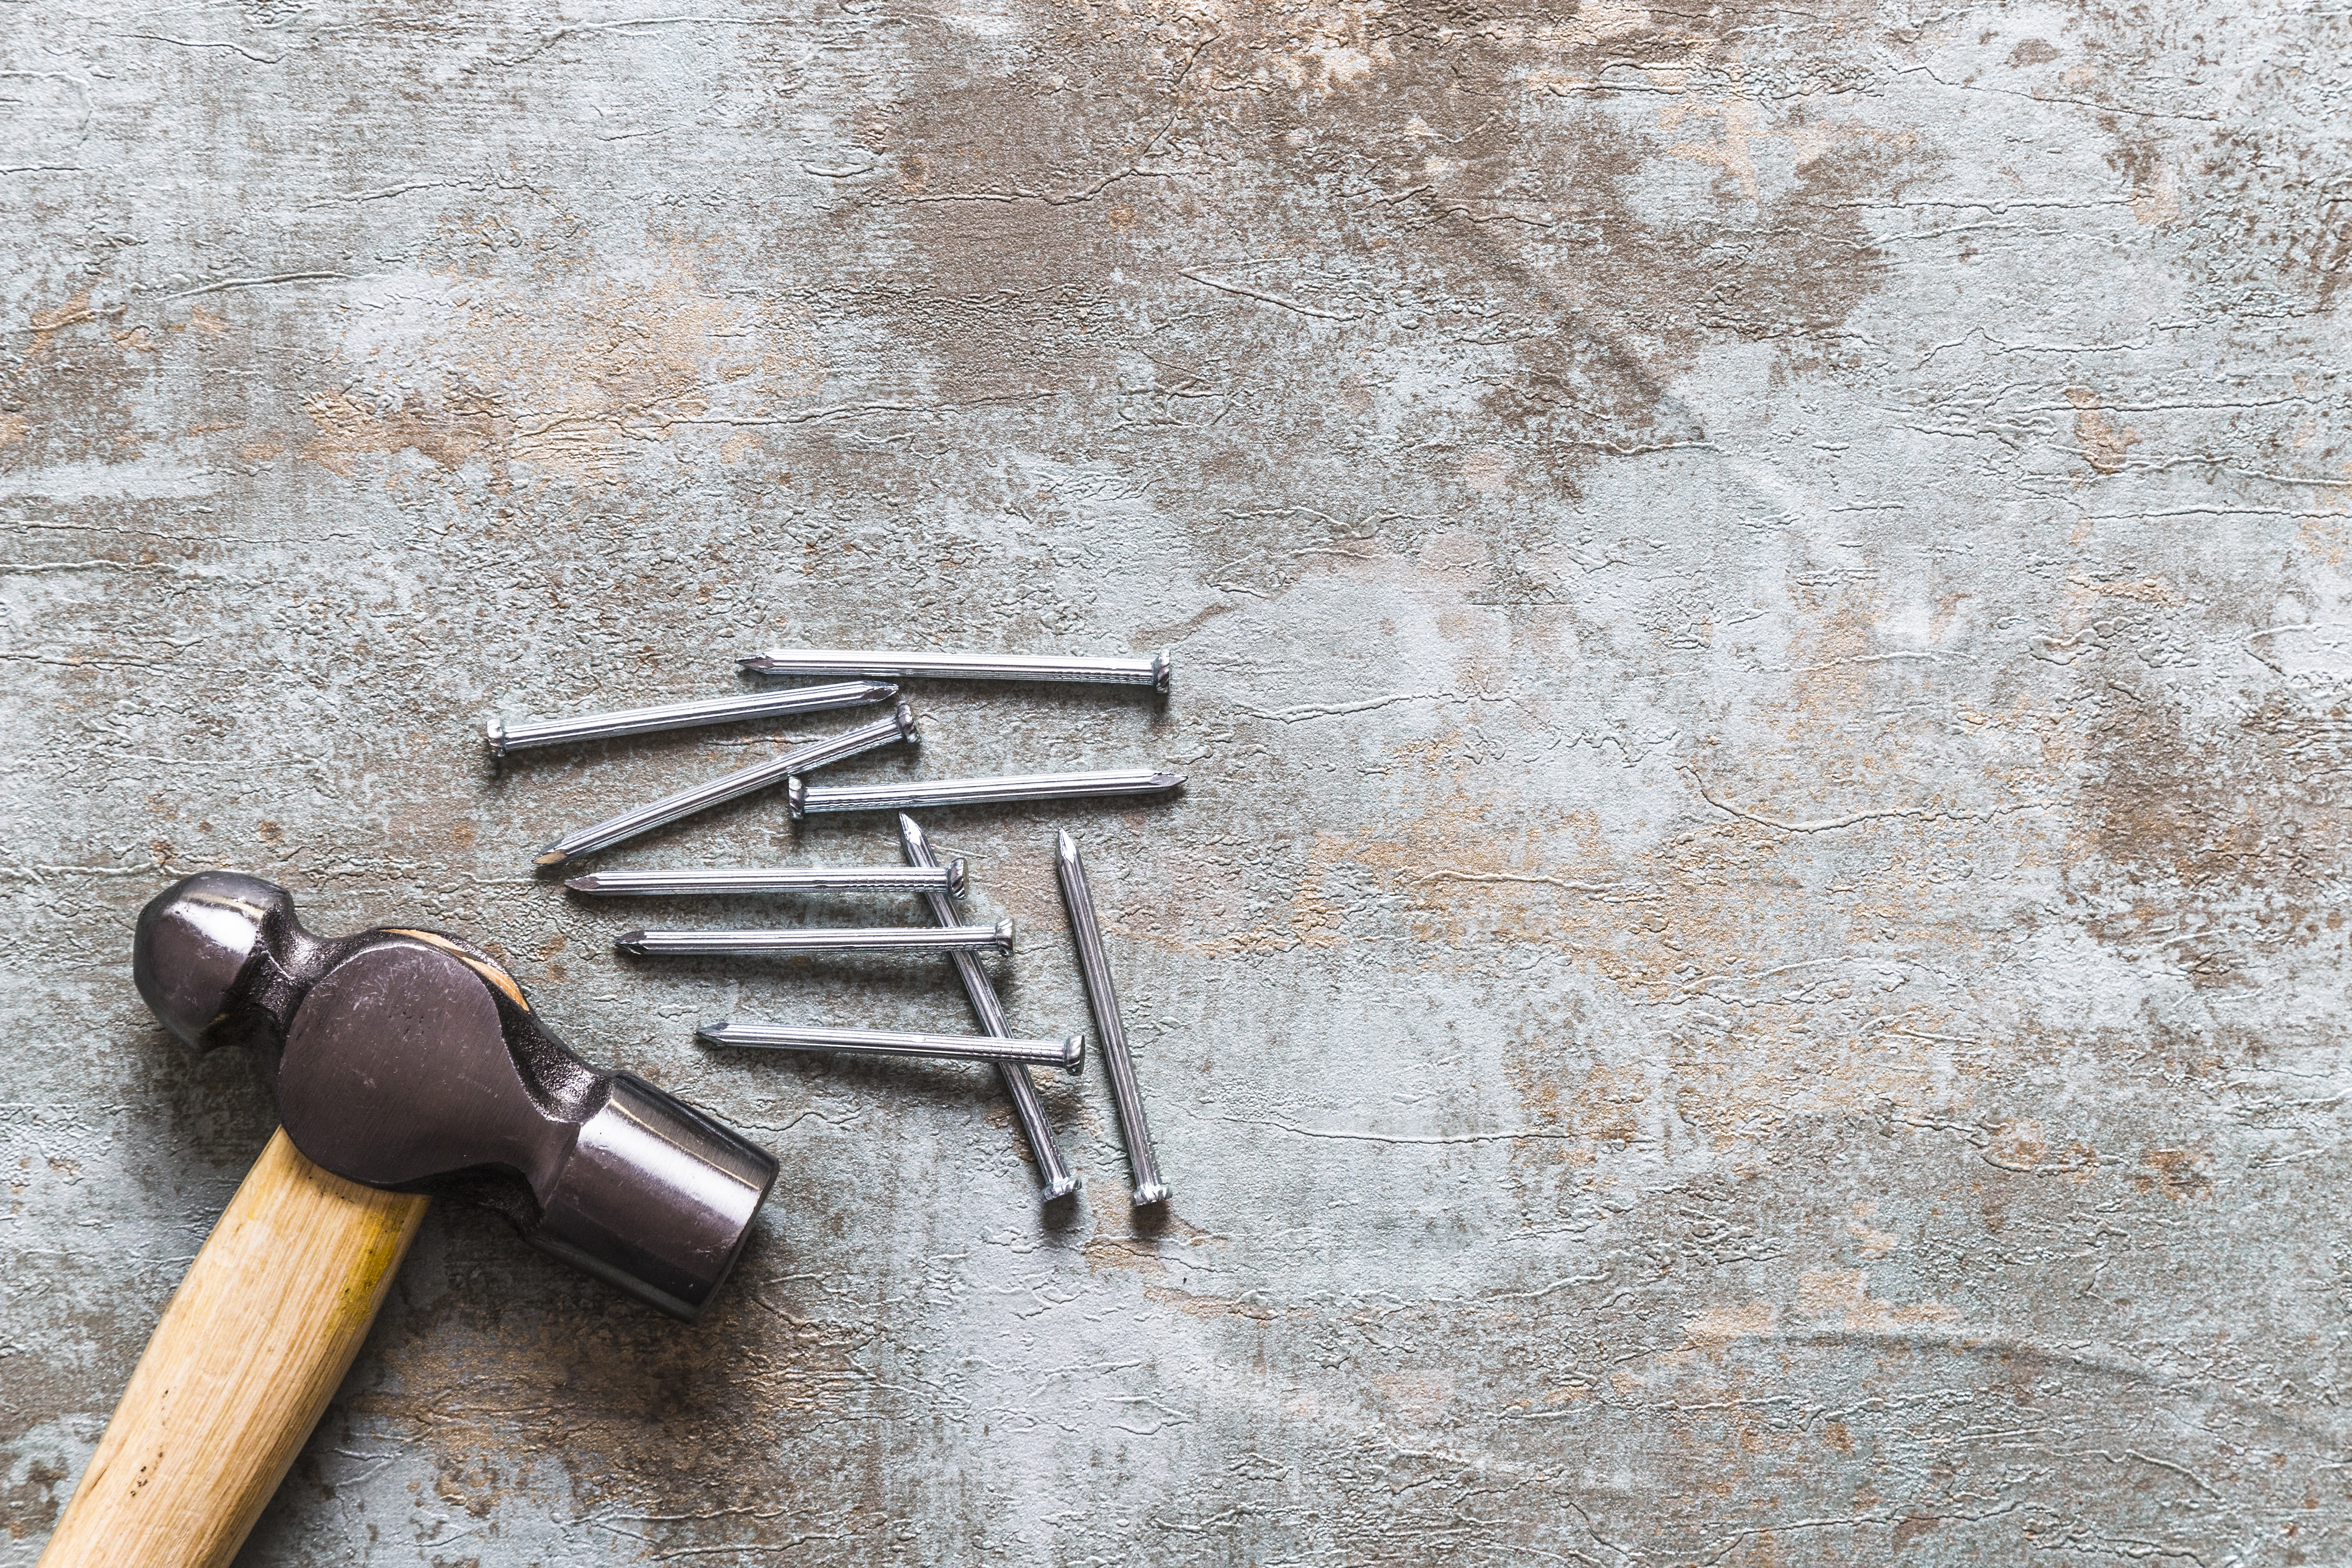 Hammer and nails in the bottom left corner on a weathered grey background.